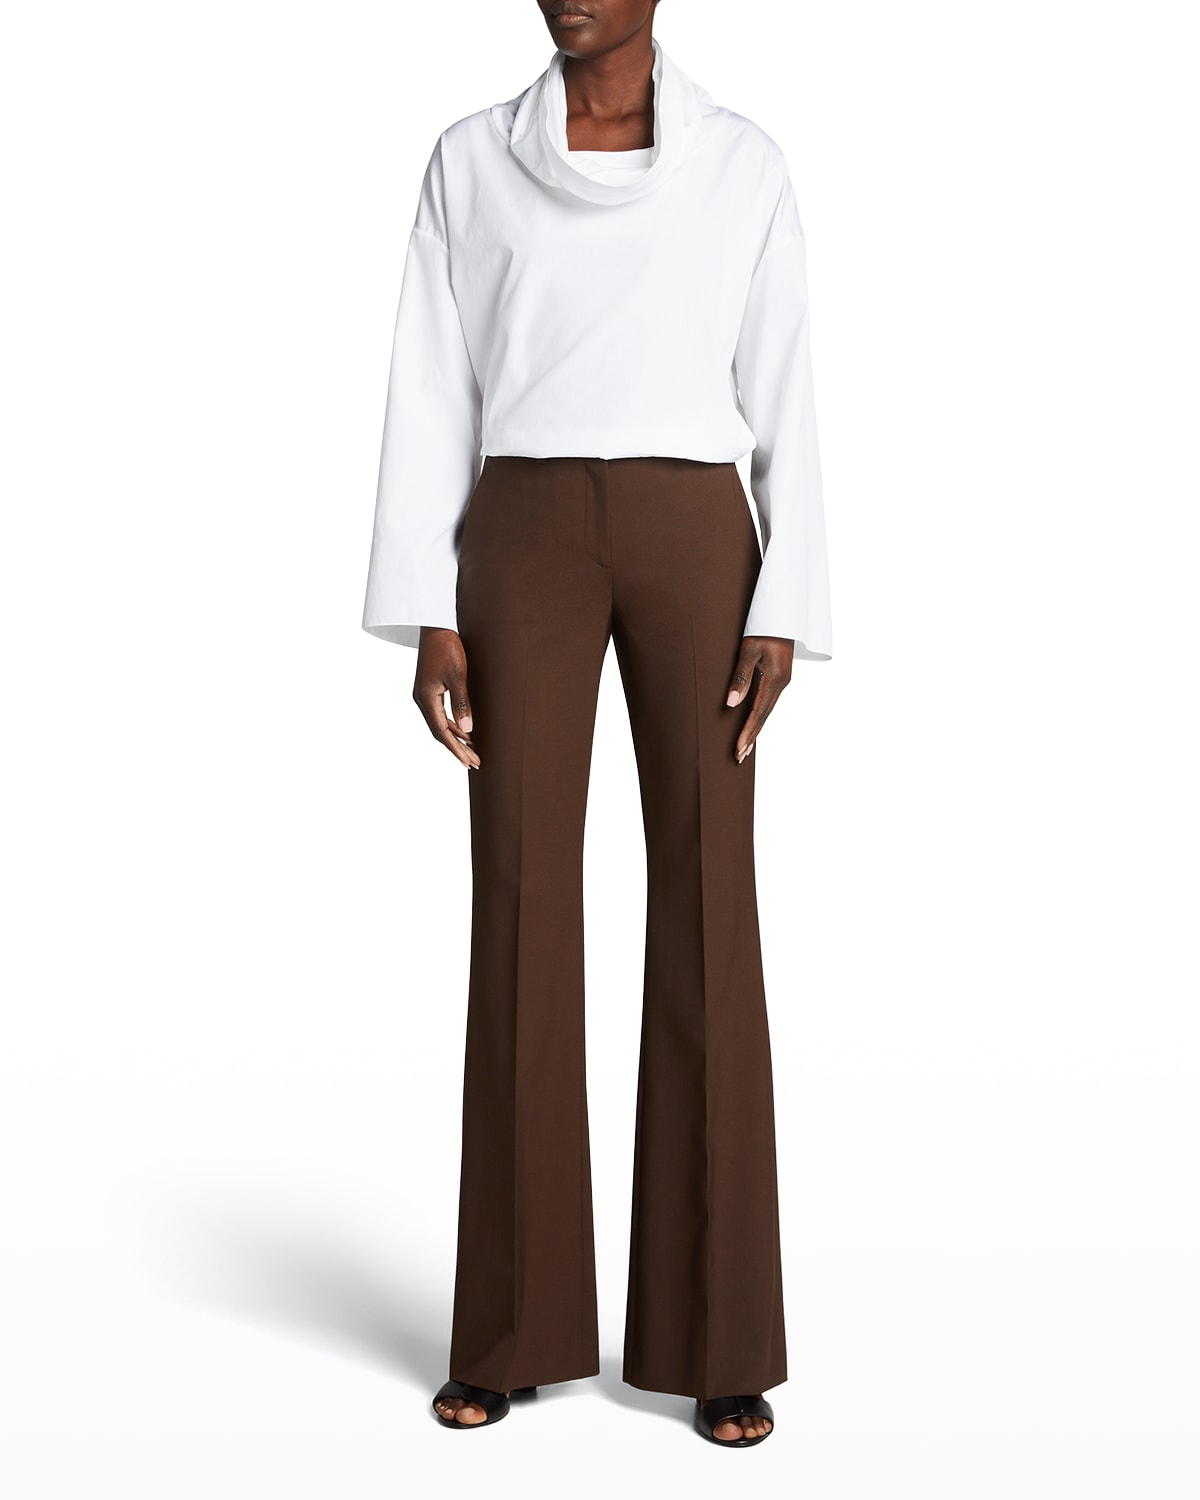 Demitria Pant in Good Wool – Muse Boutique